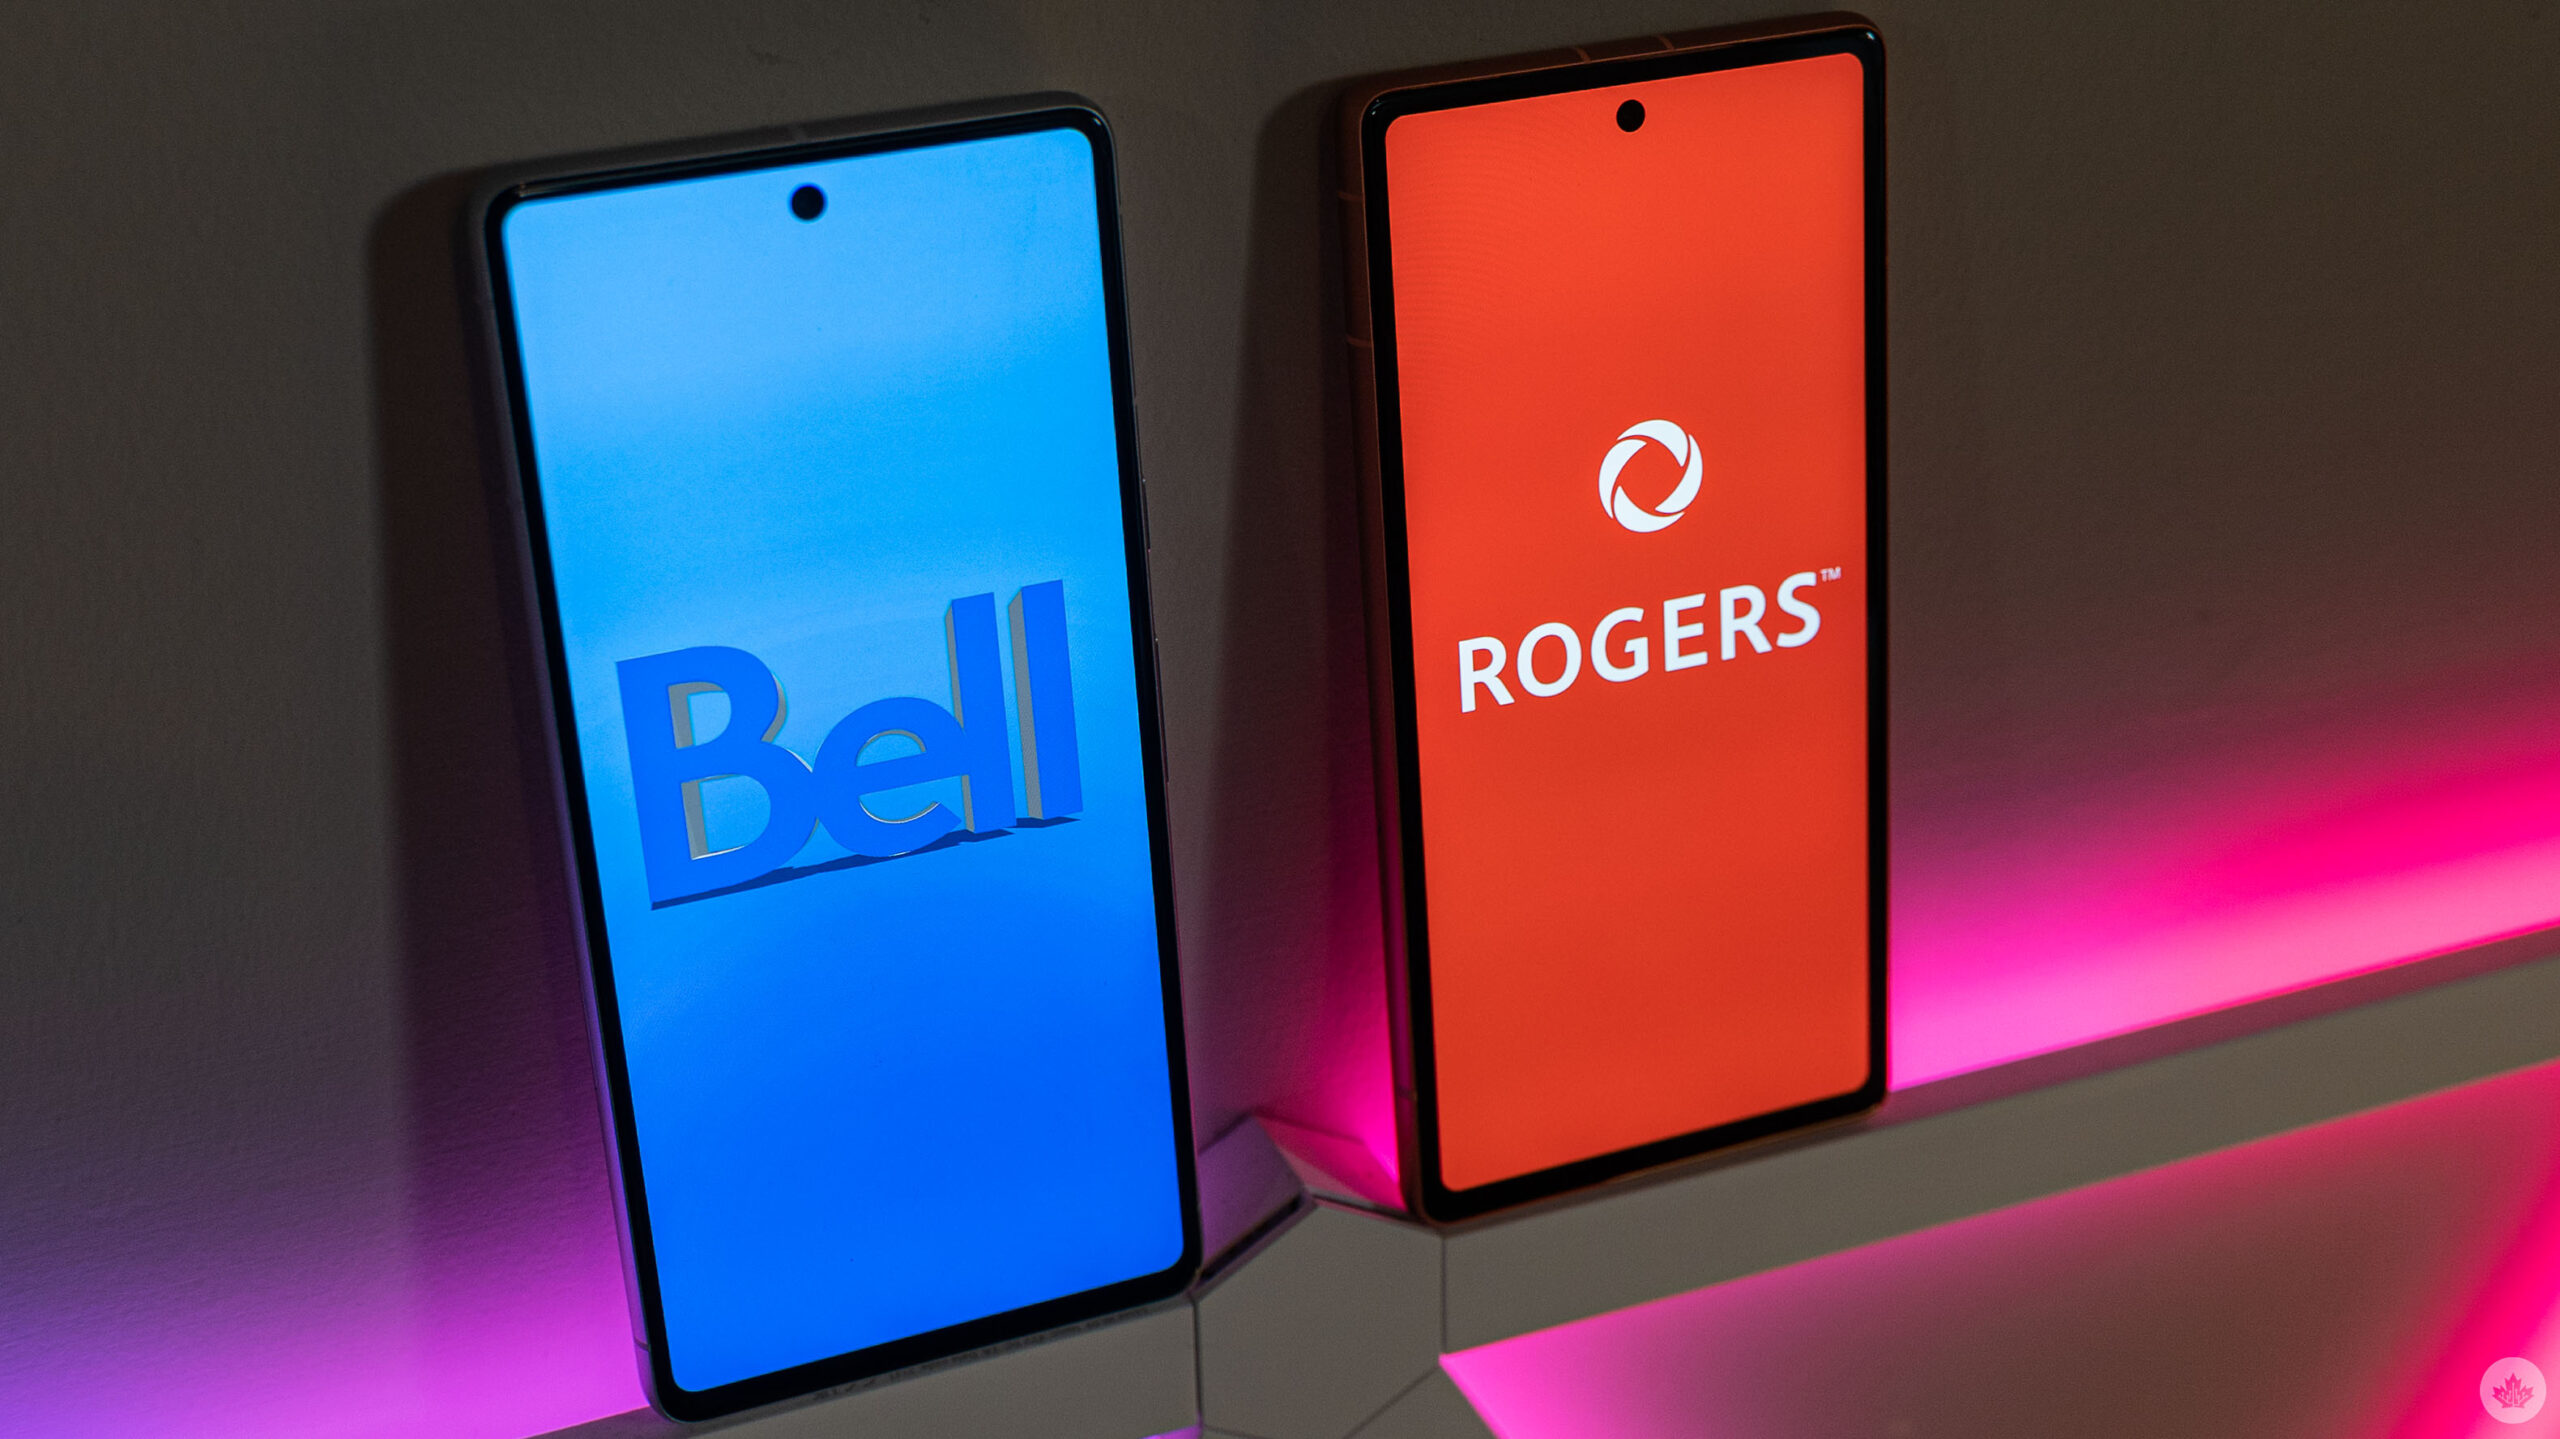 Bell and Rogers logos on smartphones.